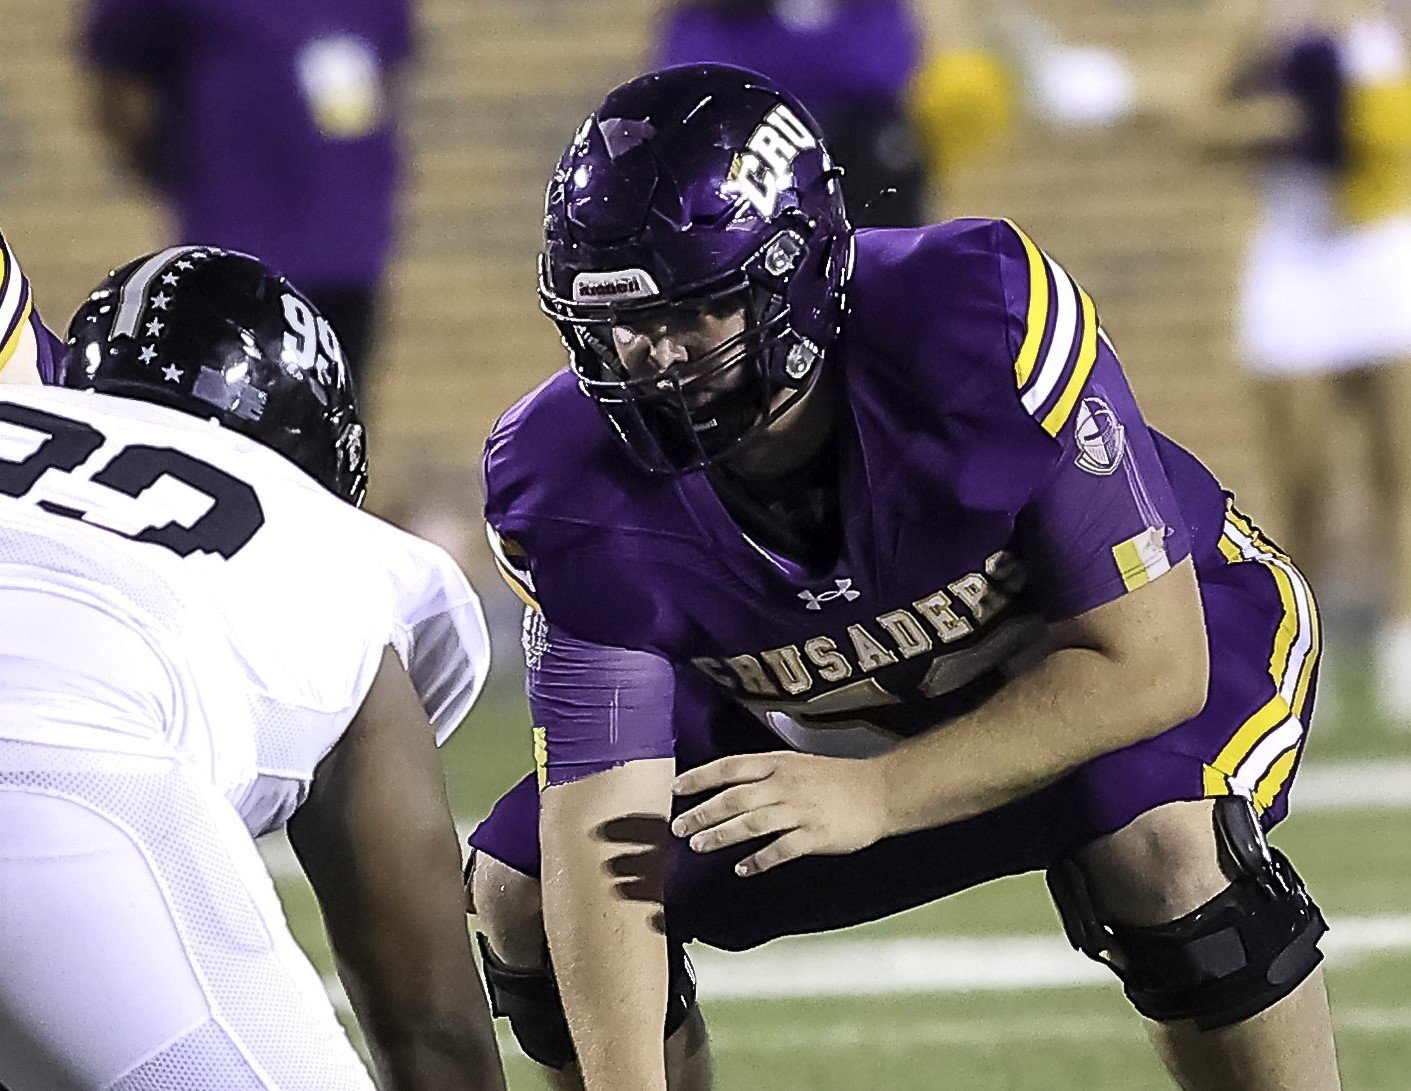 Jacob Dailey in action for the Mary Hardin Baylor Crusaders, where he has been on the team for two seasons.